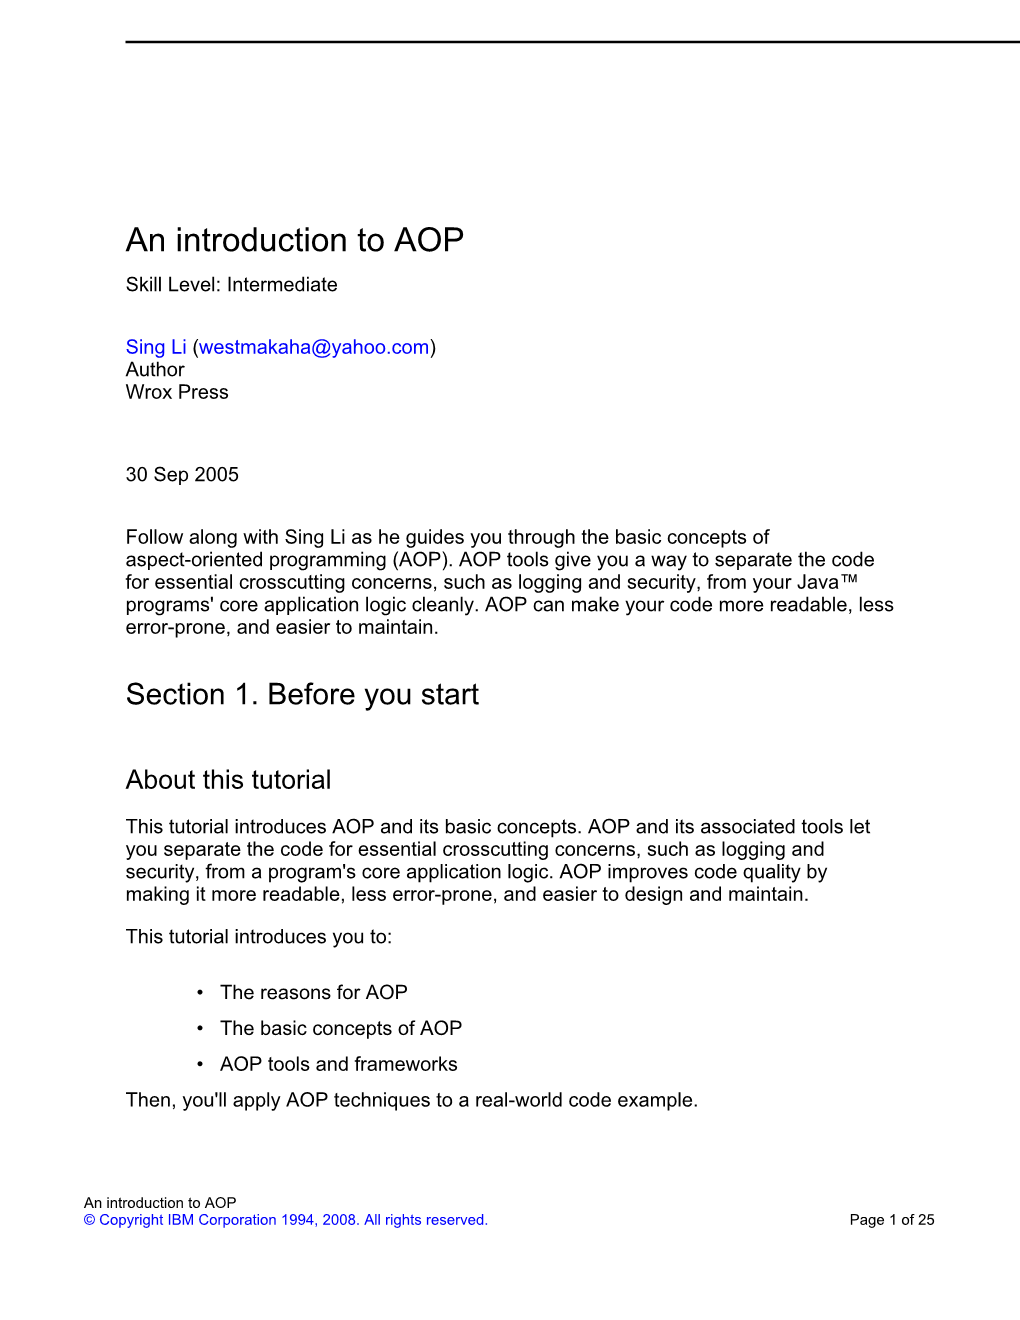 An Introduction to AOP Skill Level: Intermediate